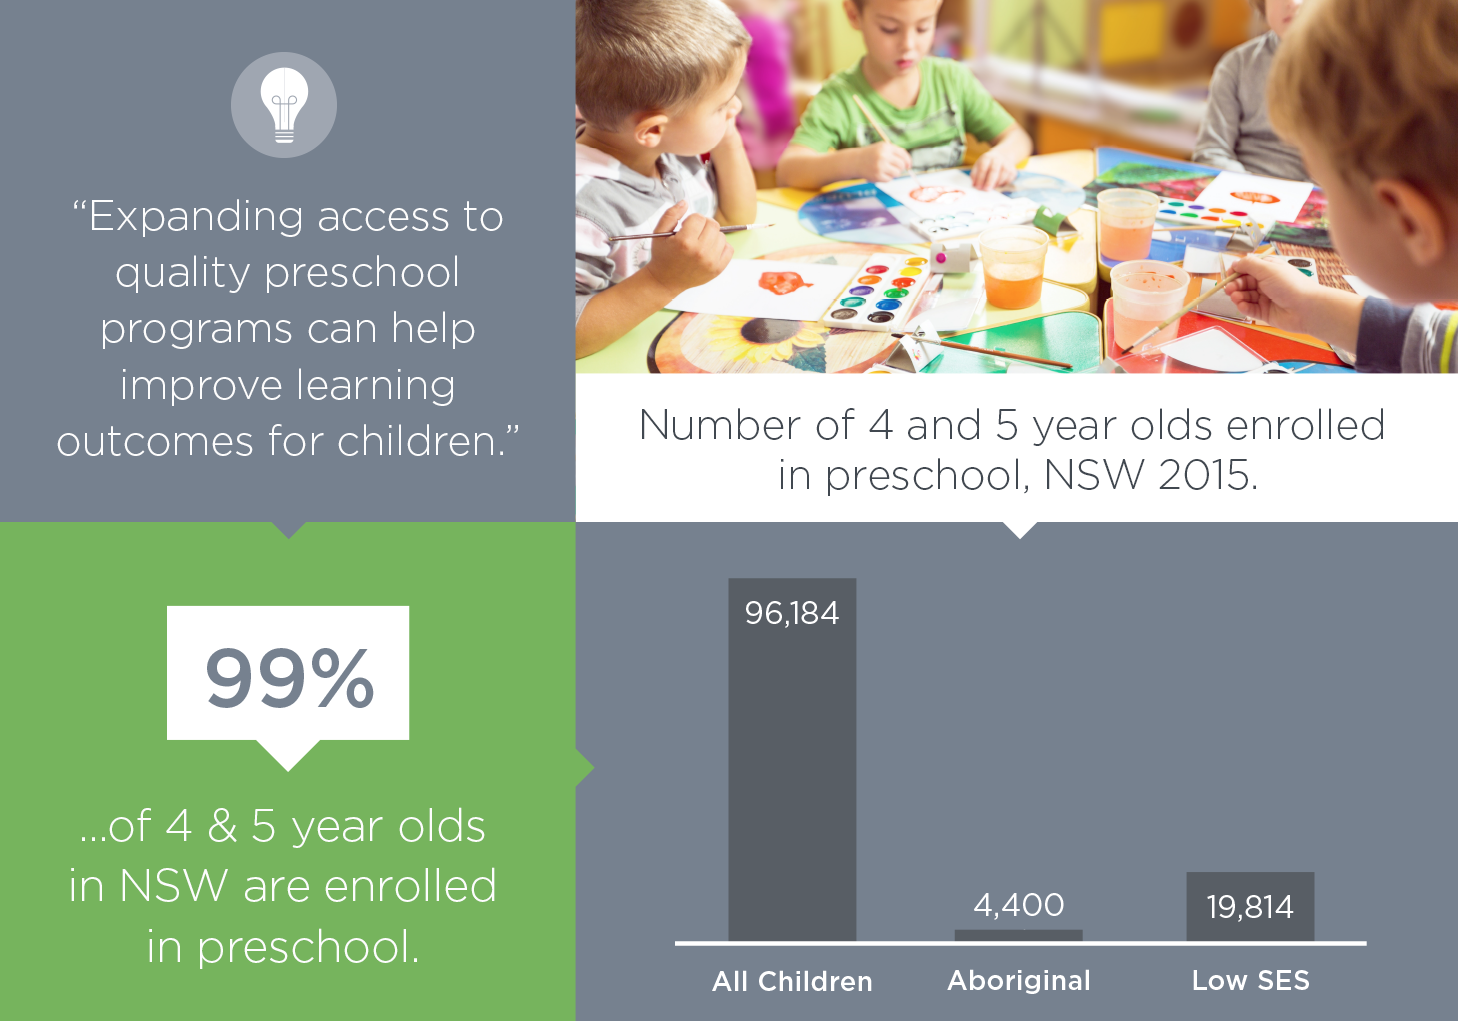 Over 99 per cent of four and five year olds in NSW are enrolled in a preschool program before starting school.